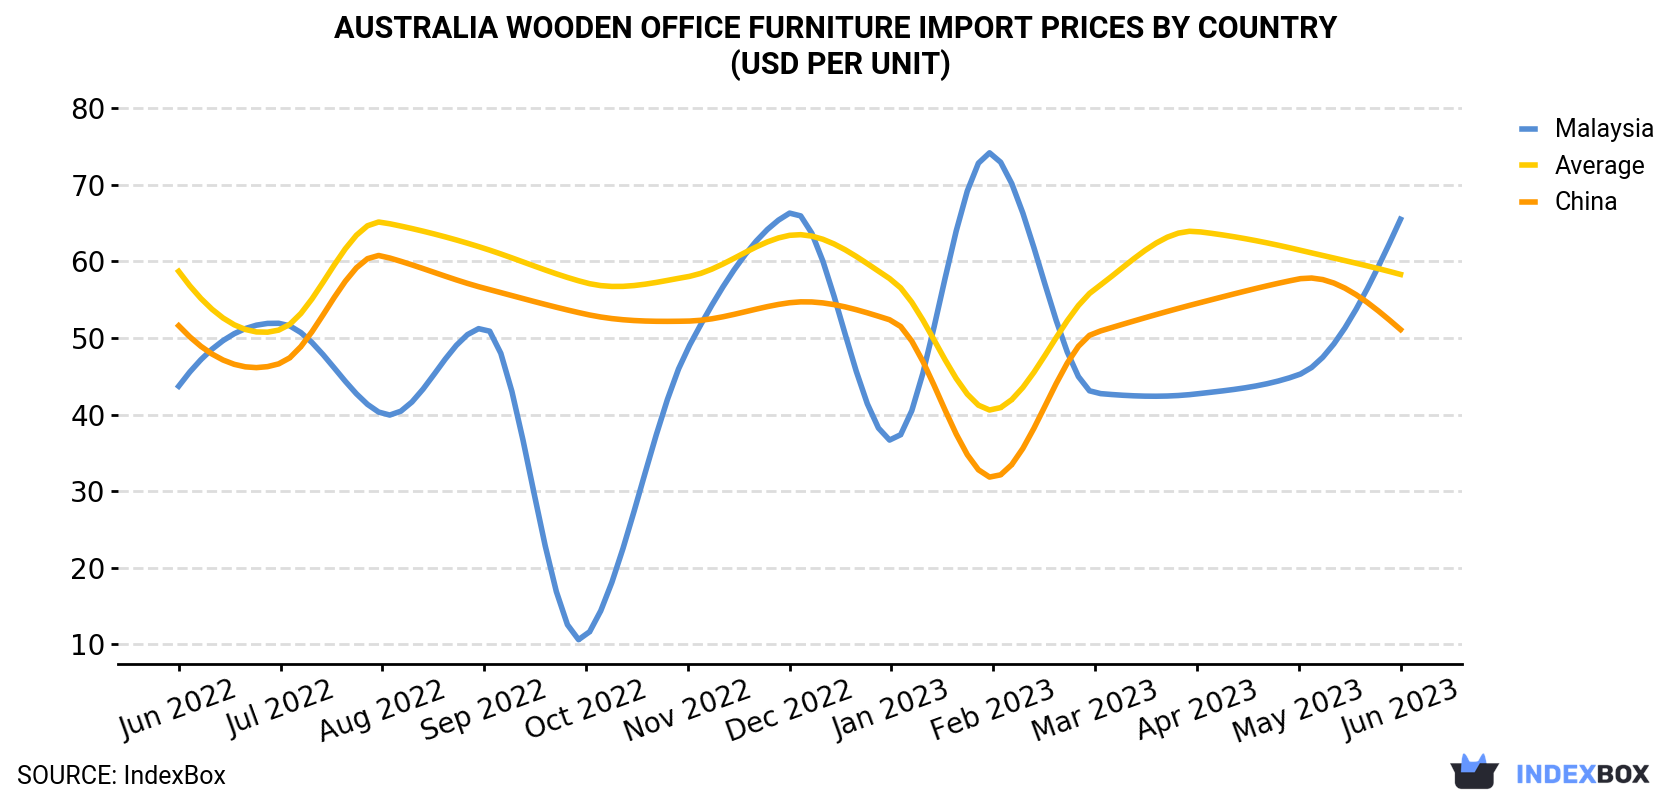 Australia Wooden Office Furniture Import Prices By Country (USD Per Unit)